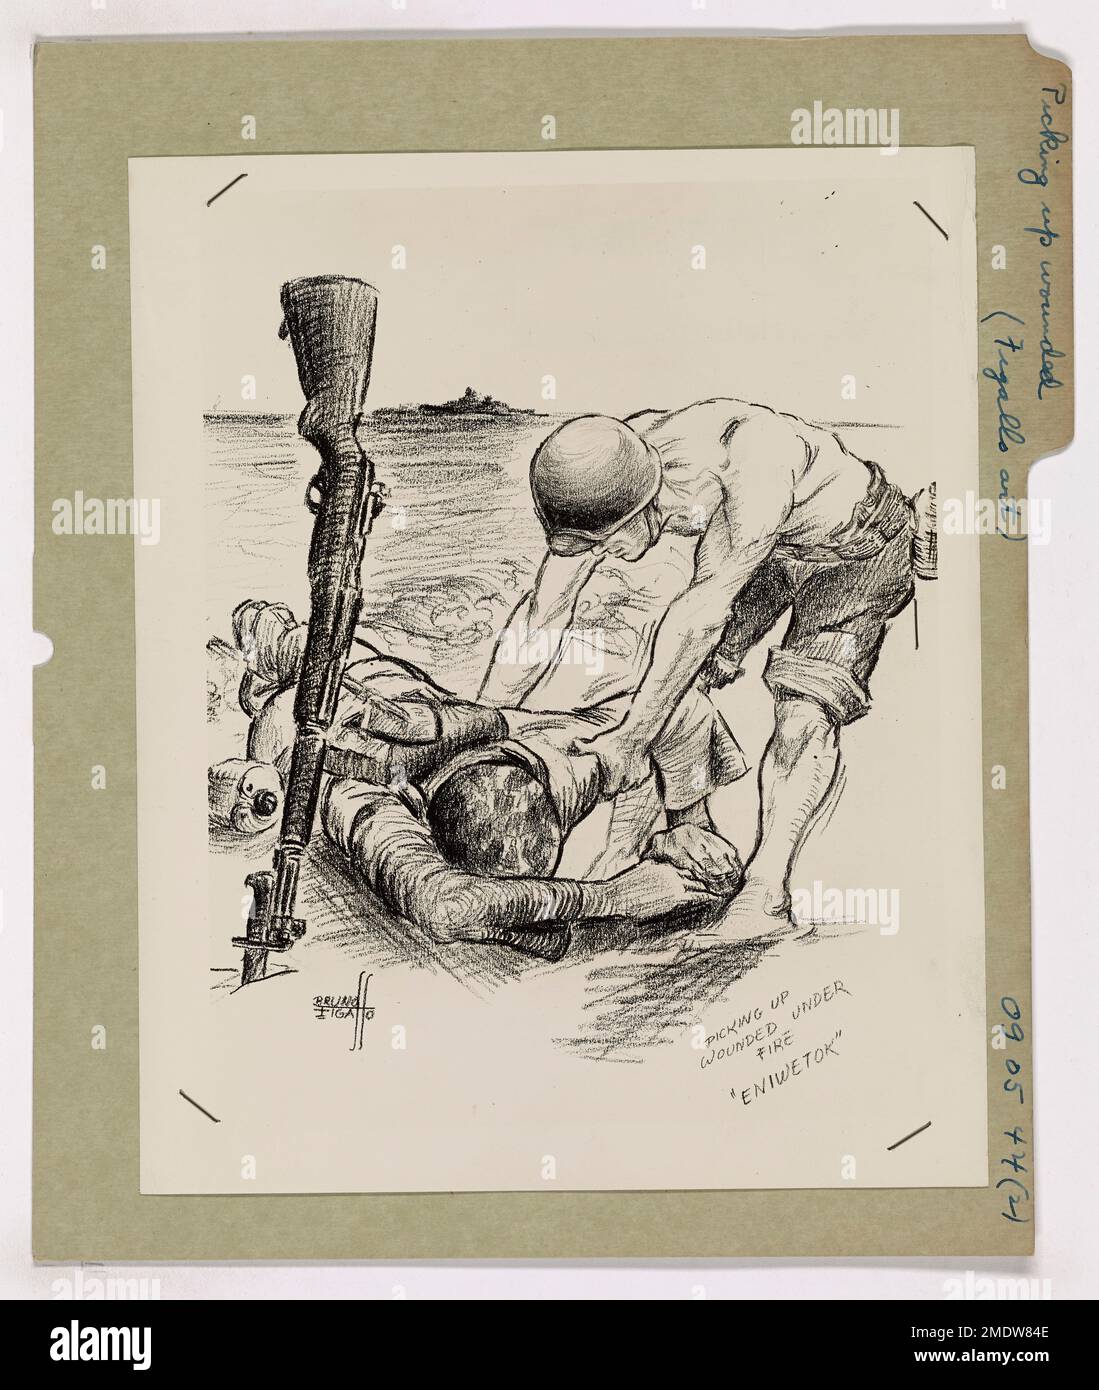 Picking up the Wounded Under Fire. This image depicts artwork of a Coast Guardsman aiding a wounded comrade during the invasion of Eniwetok Atoll, drawn by Coast Guard Combat Artist Bruno Figallo. See also 26-G-20571. Stock Photo